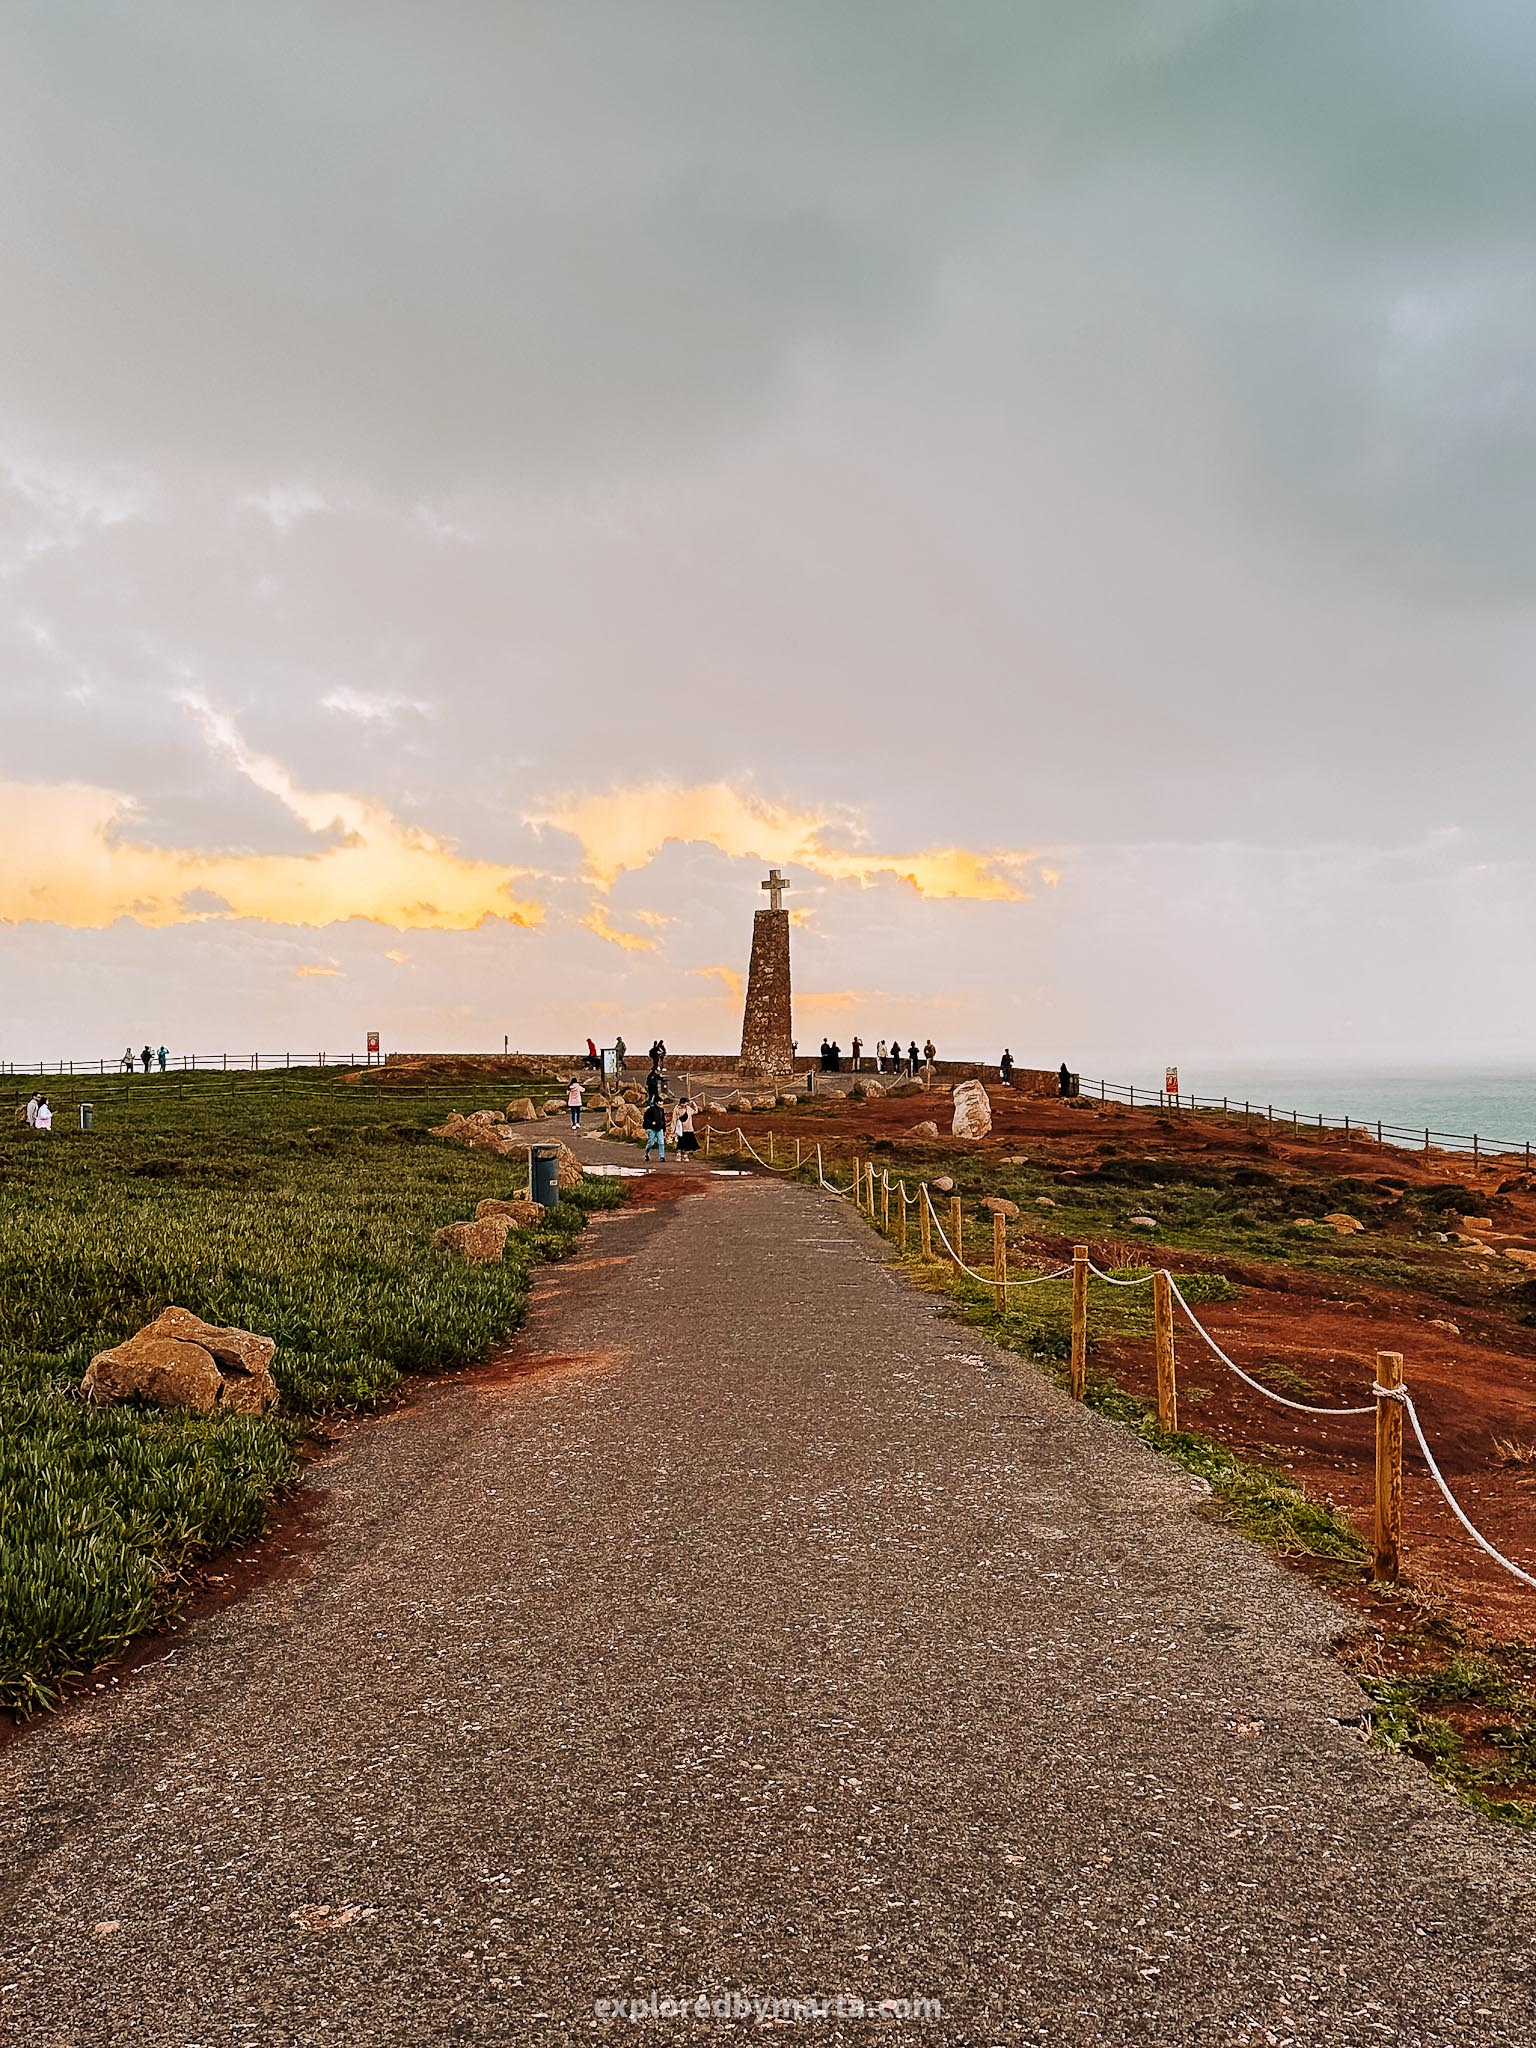 Sunset at Cabo da Roca in Portugal - the most Westernmost point in continental Portugal and Europe